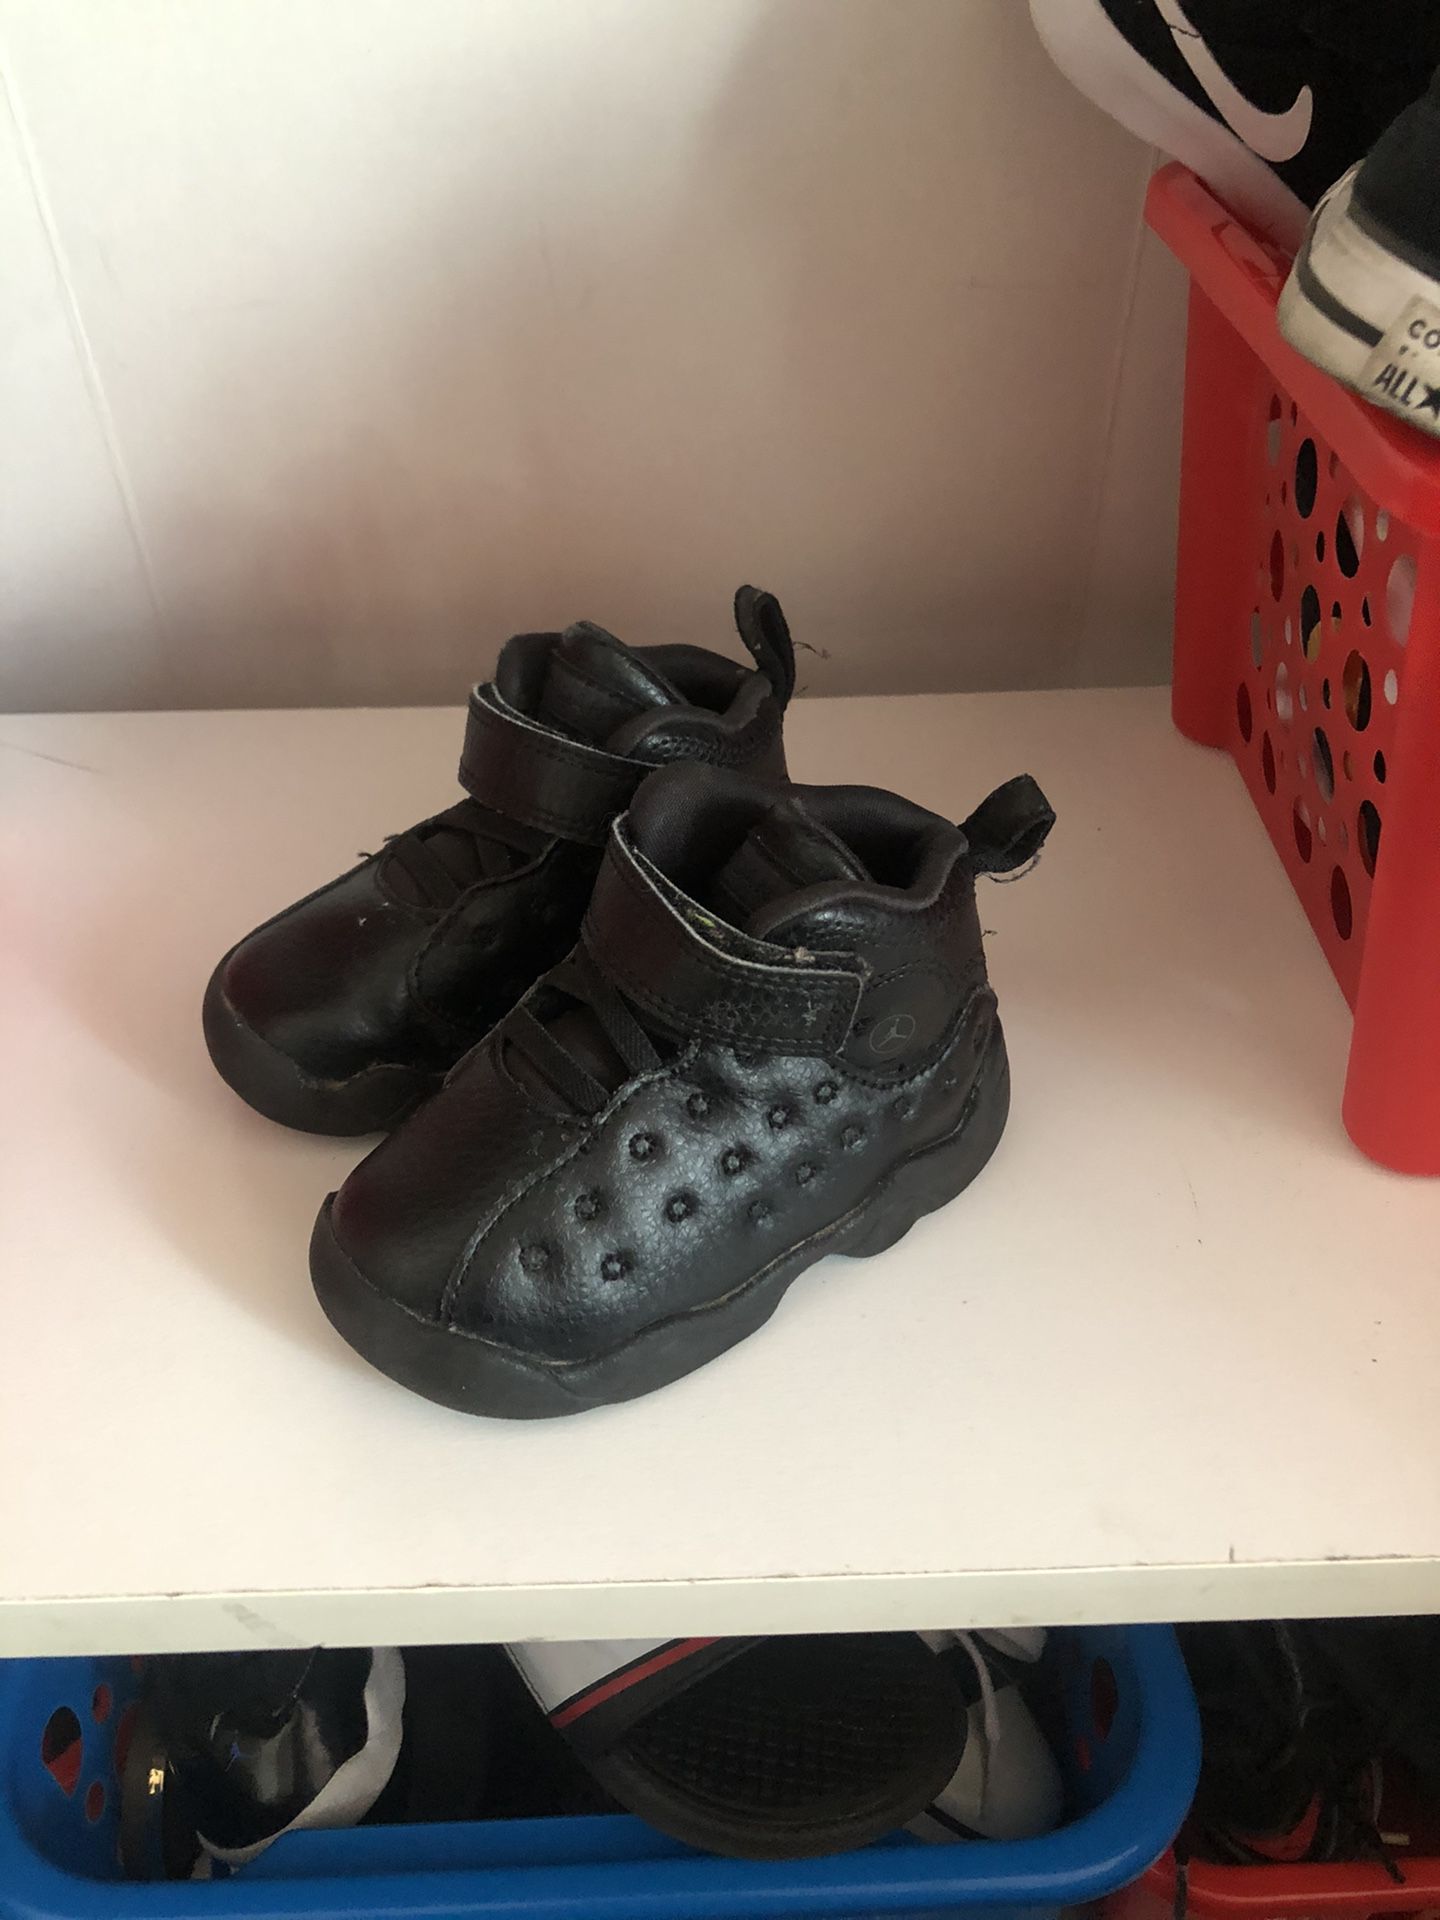 Baby shoes size 5